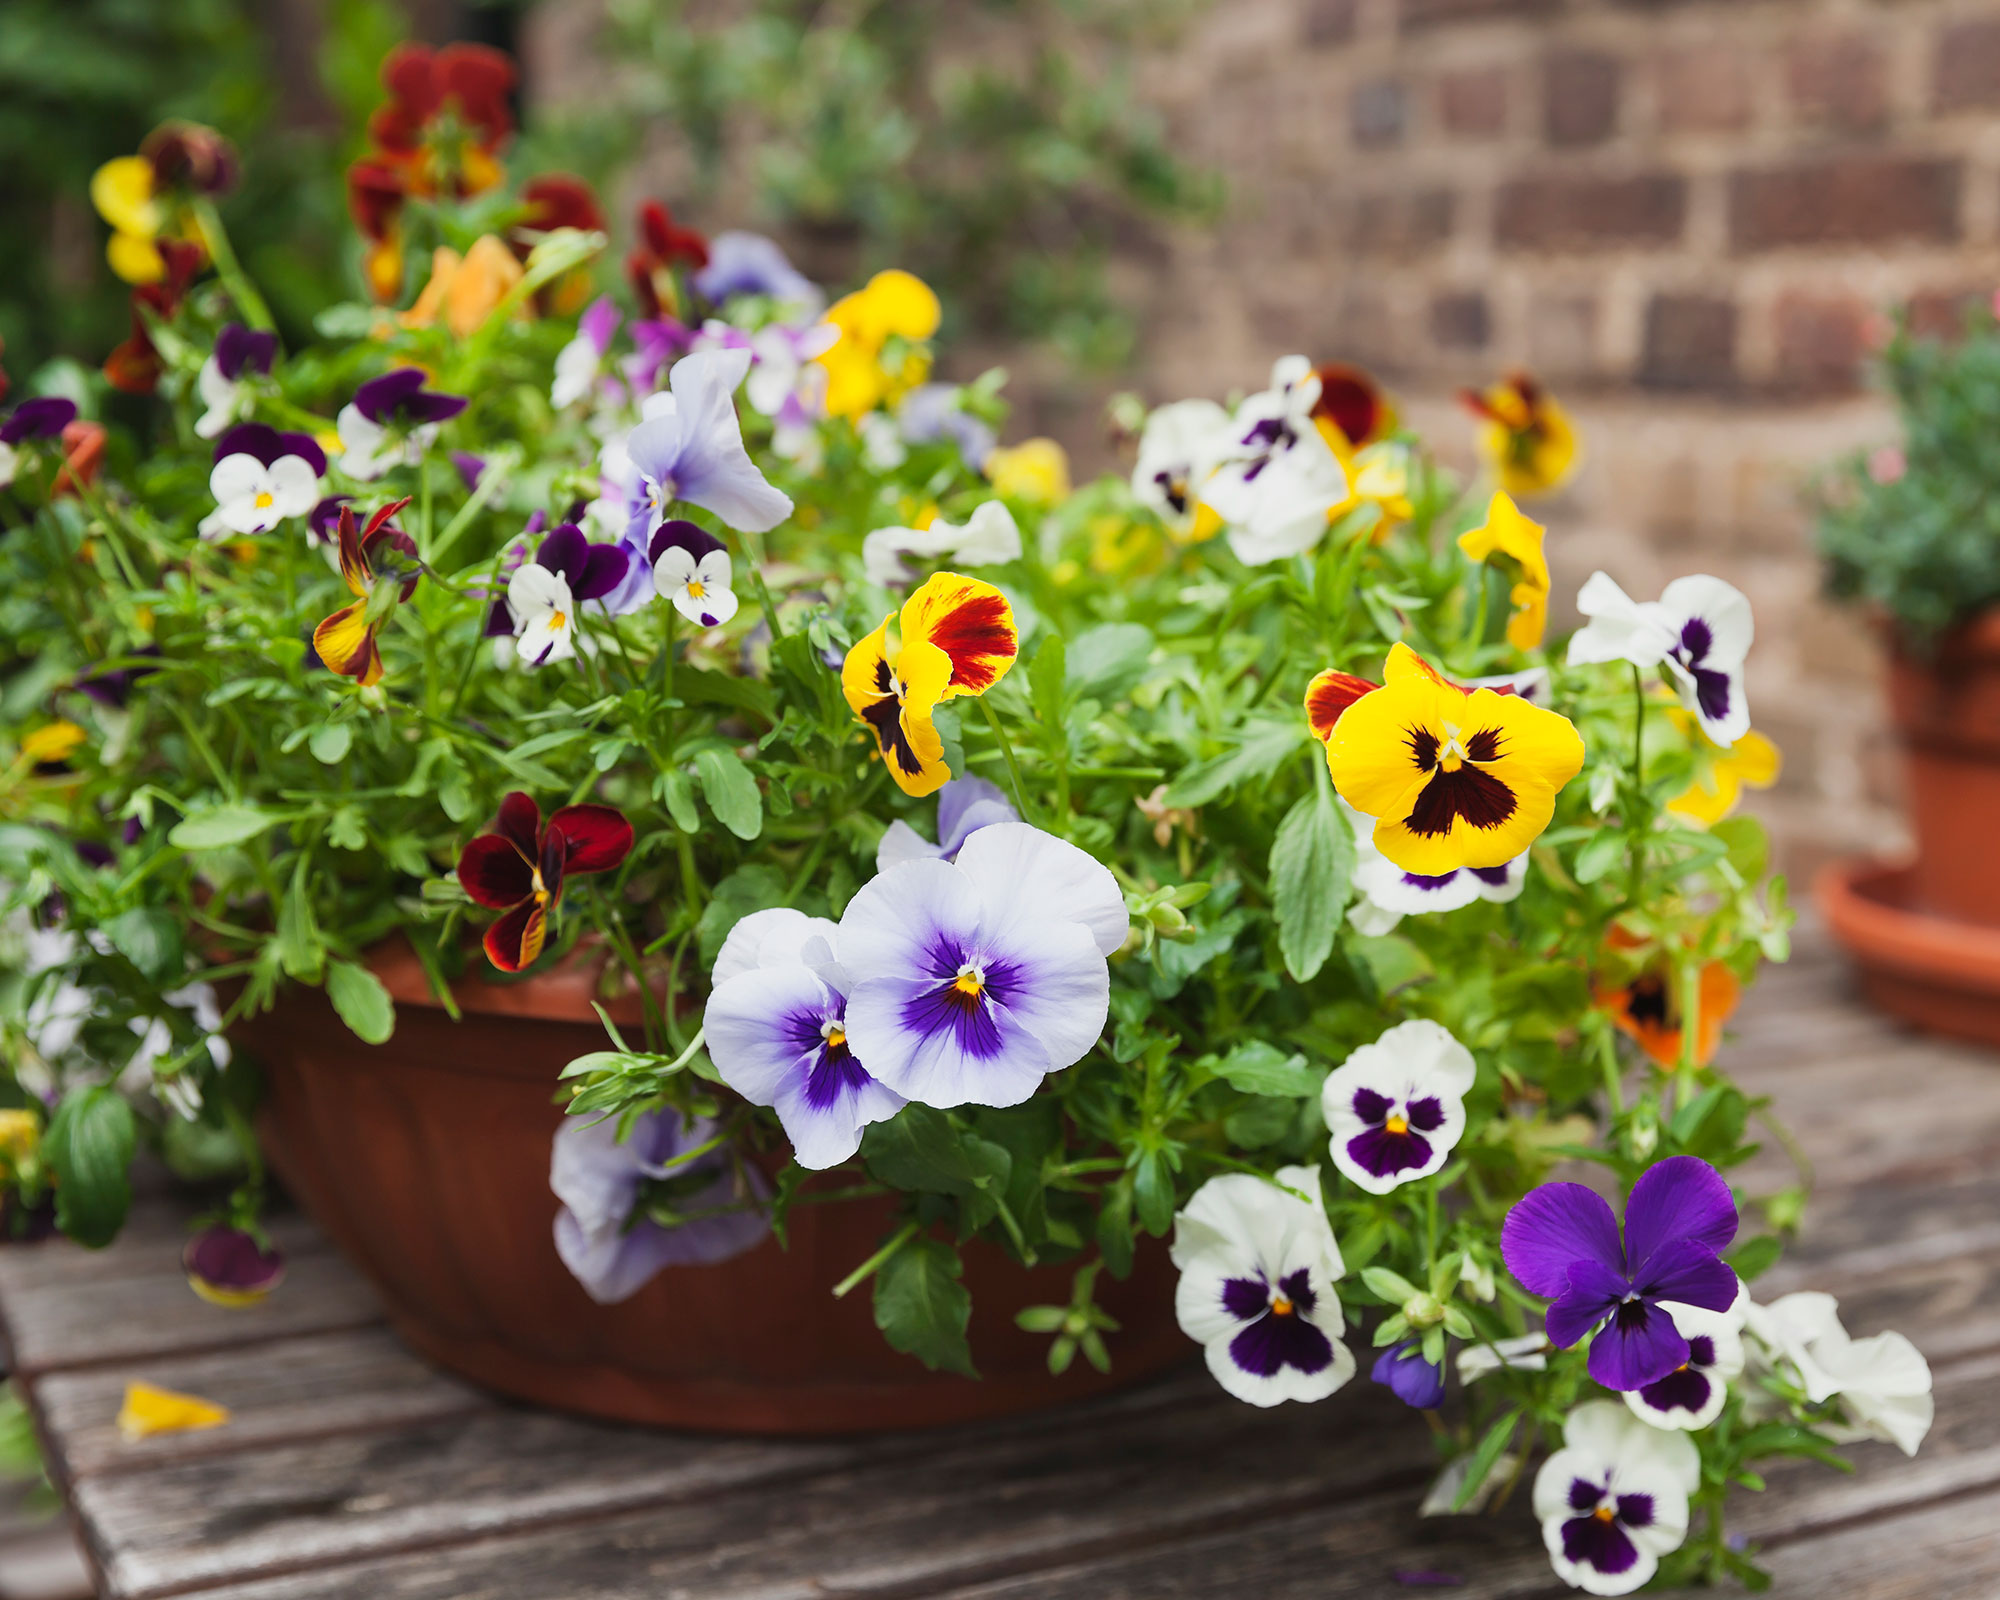 Image of Pansies in a flower bed